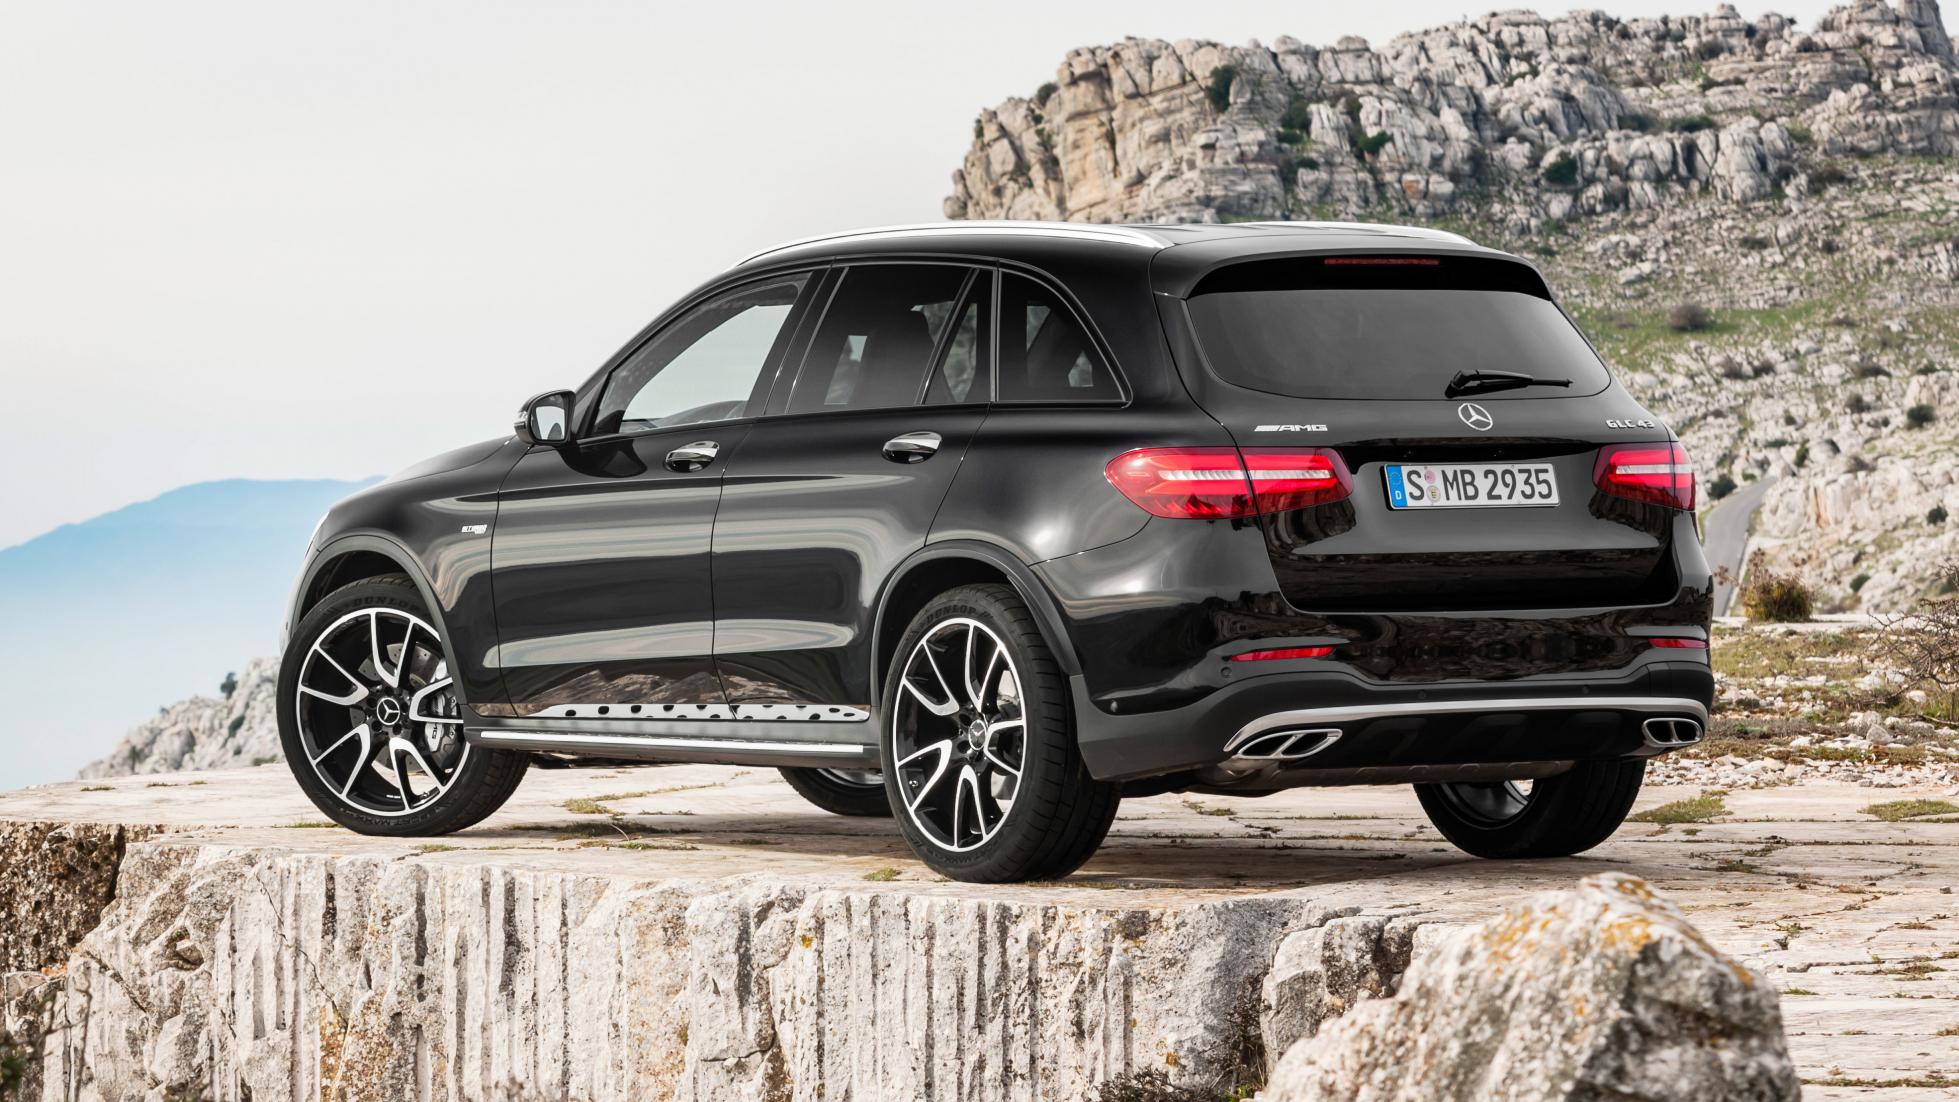 Mercedes Benz has unveiled its GLC 43 AMG ahead of New York Auto Show